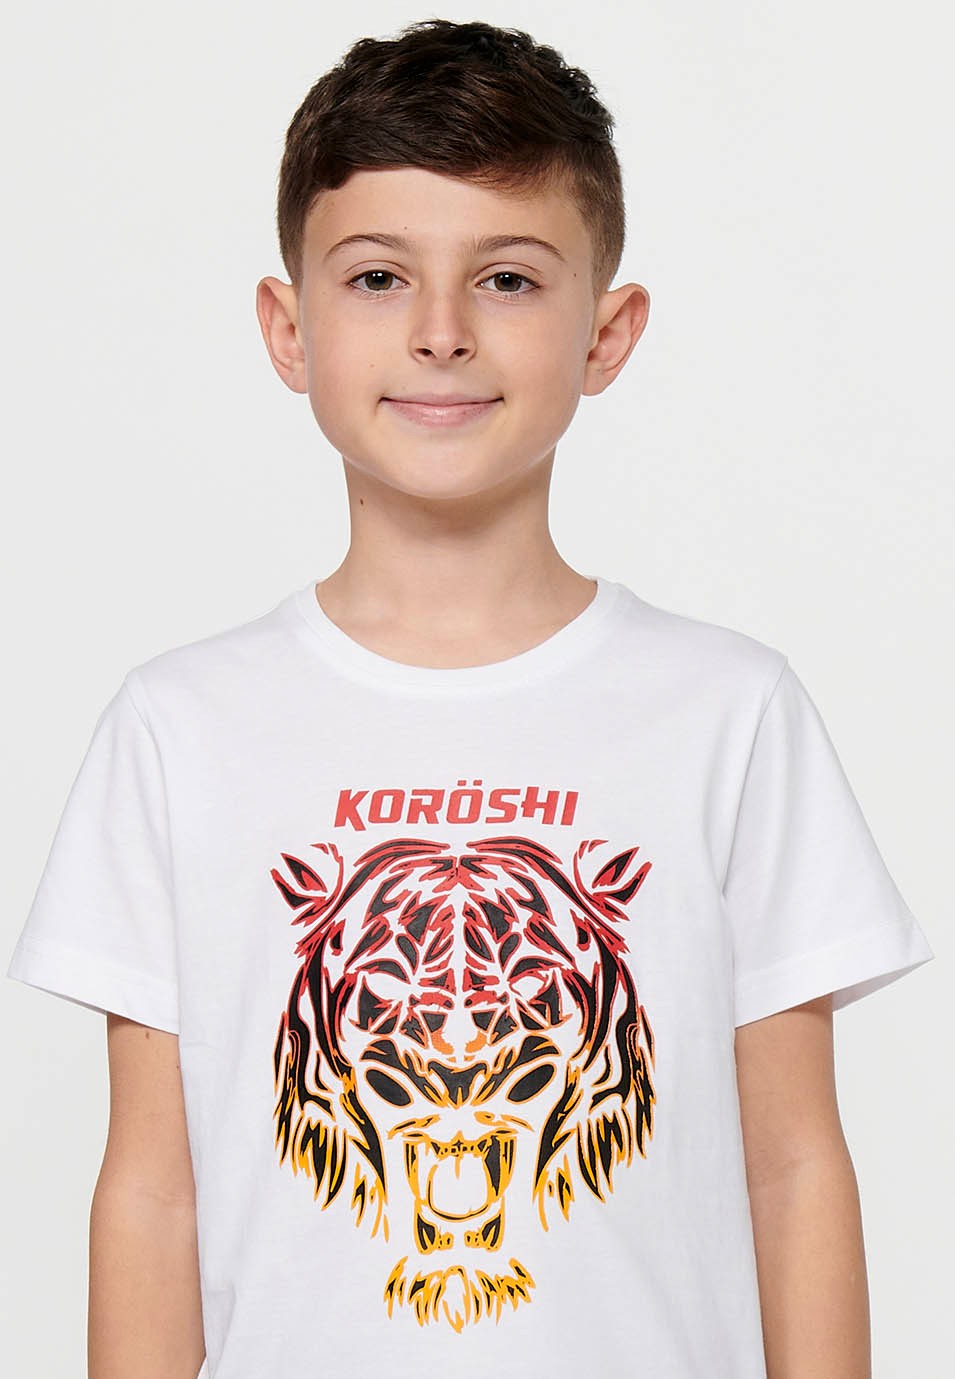 Short-sleeved cotton T-shirt with a round neckline. White front print for Boys